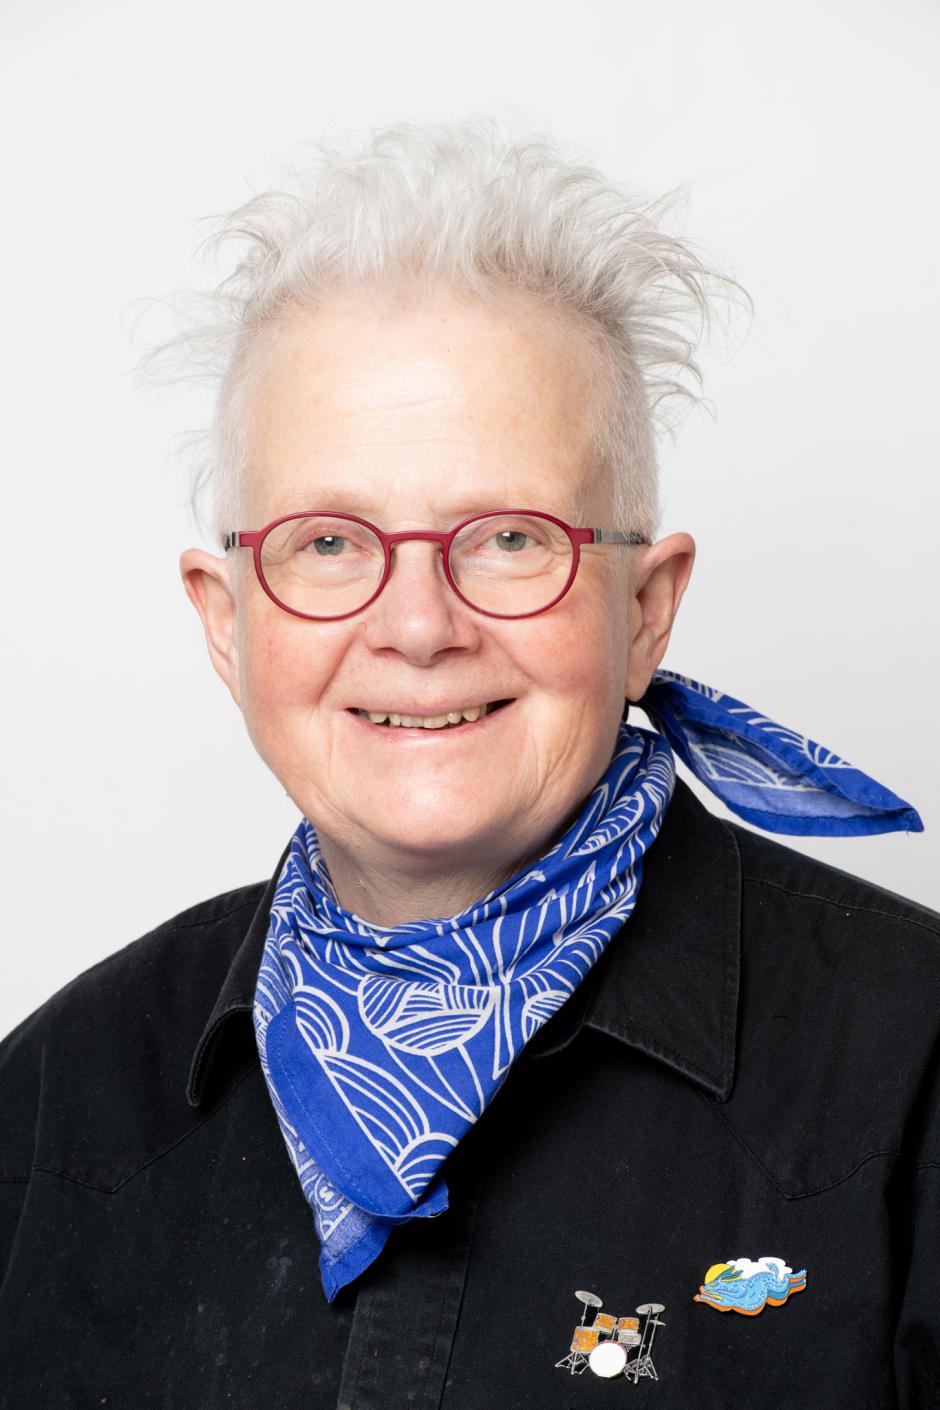 Rita McKeough smiles at the camera wearing red glasses and a blue scarf